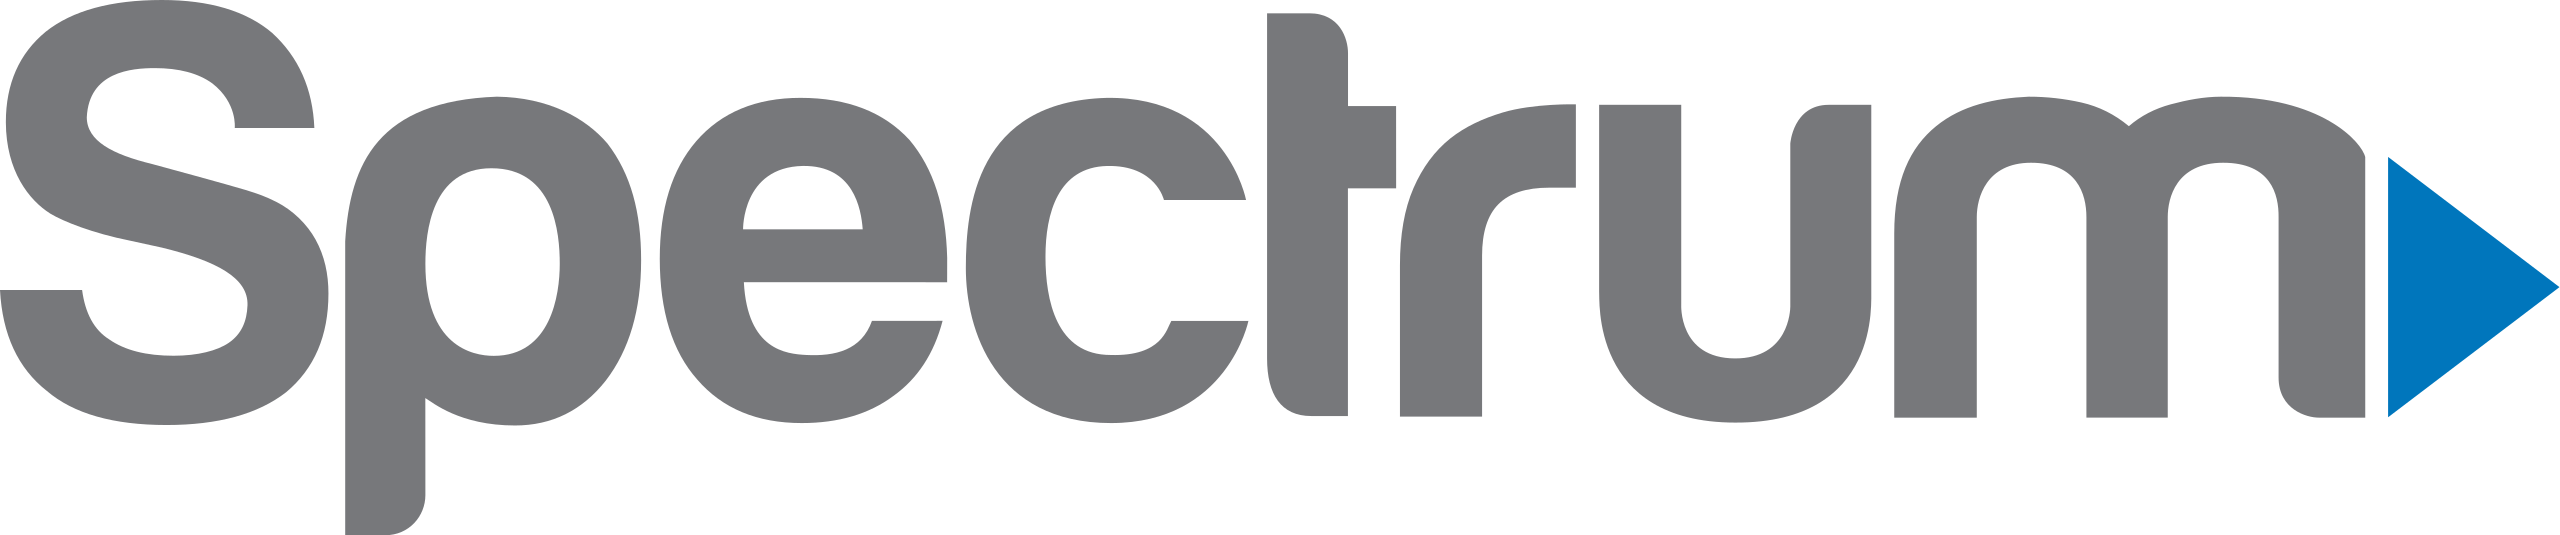 A black and white image of the logo for ctrl.